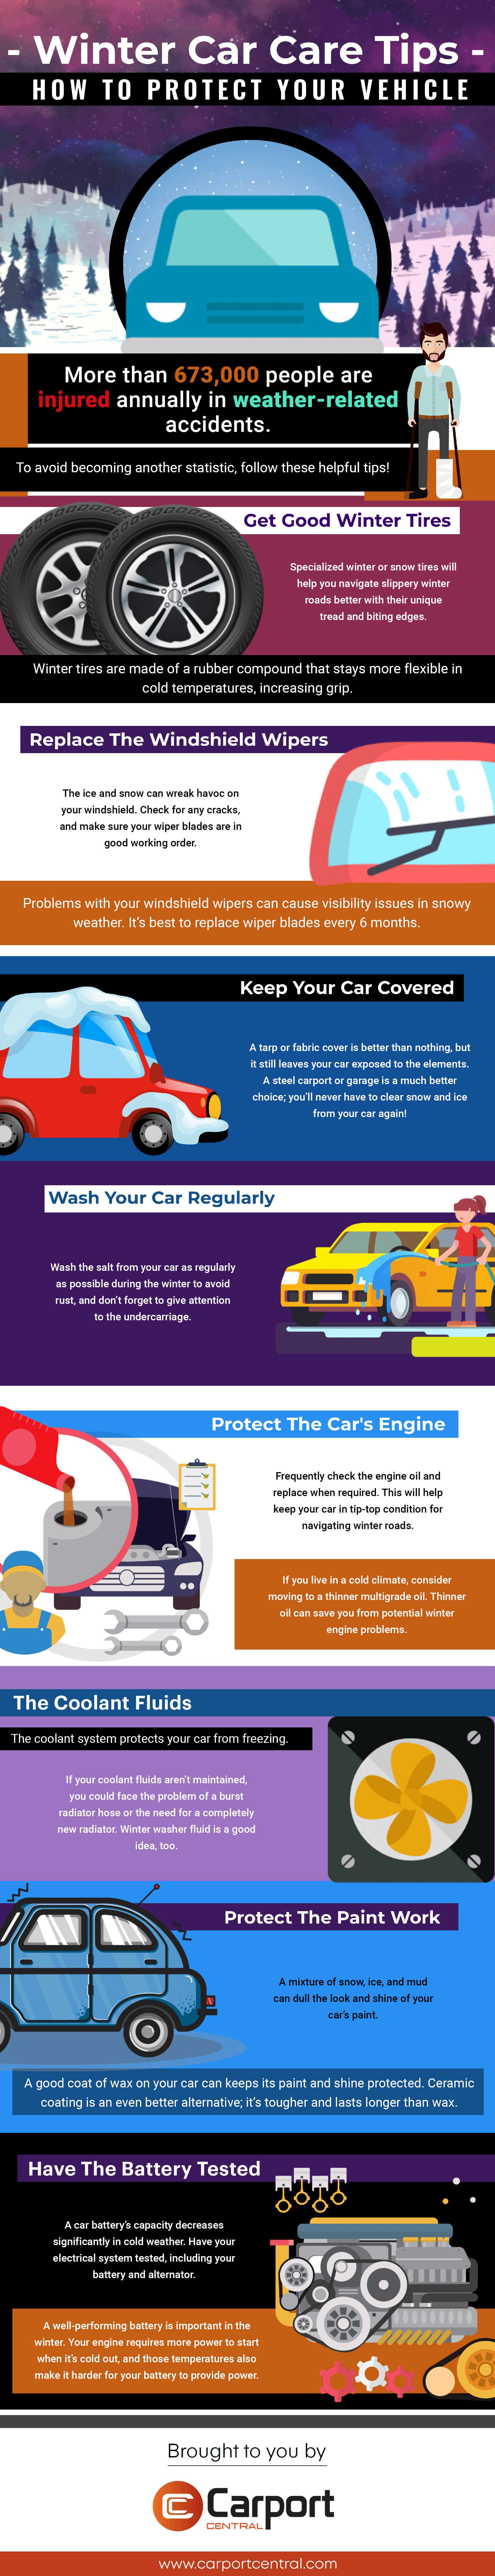 Tips to protect your vehicle in winter